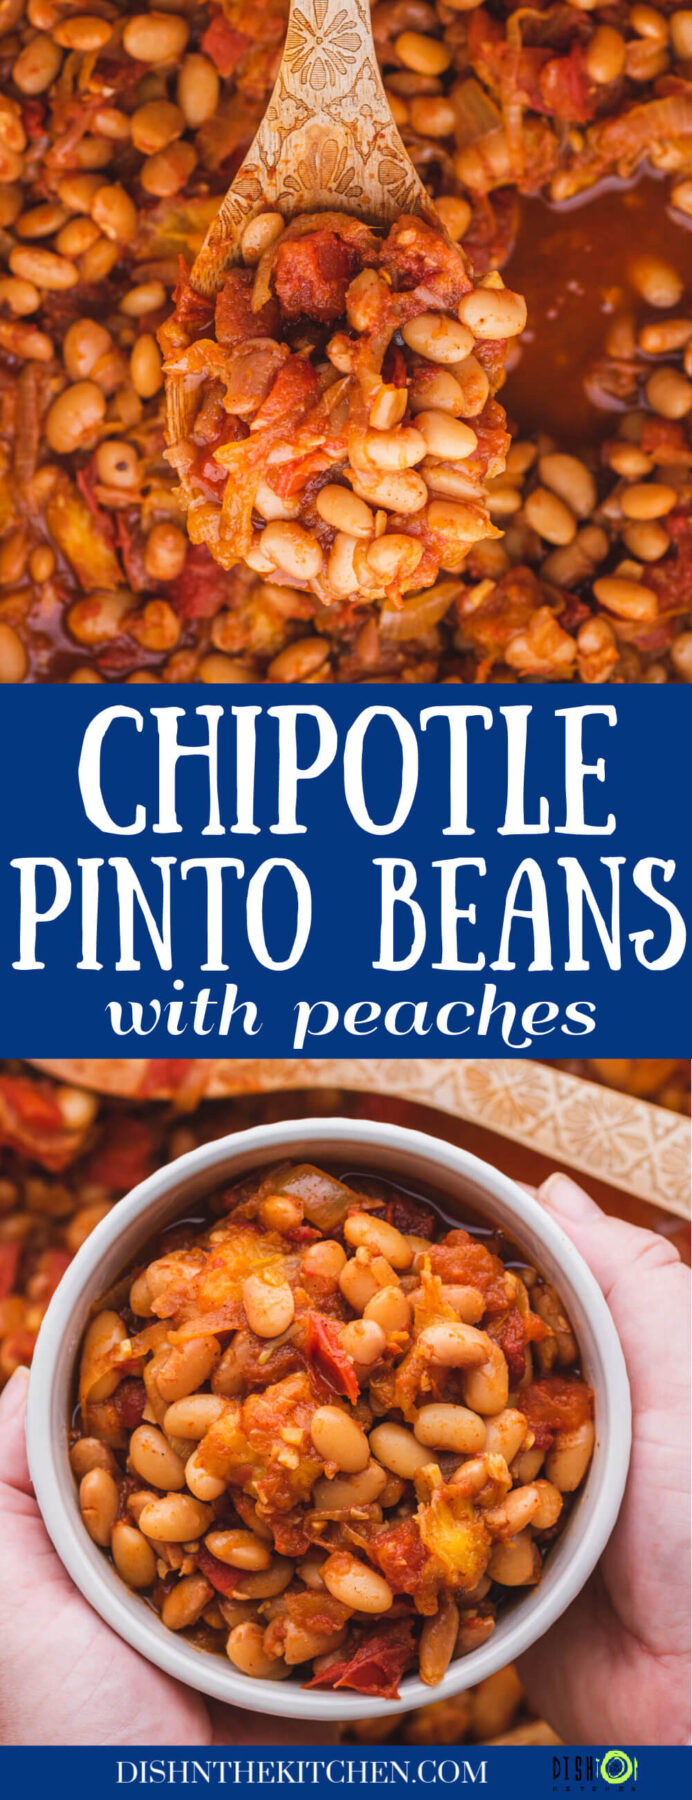 Pinterest image featuring a bowl and spoon full of chipotle pinto beans with peaches and tomatoes.